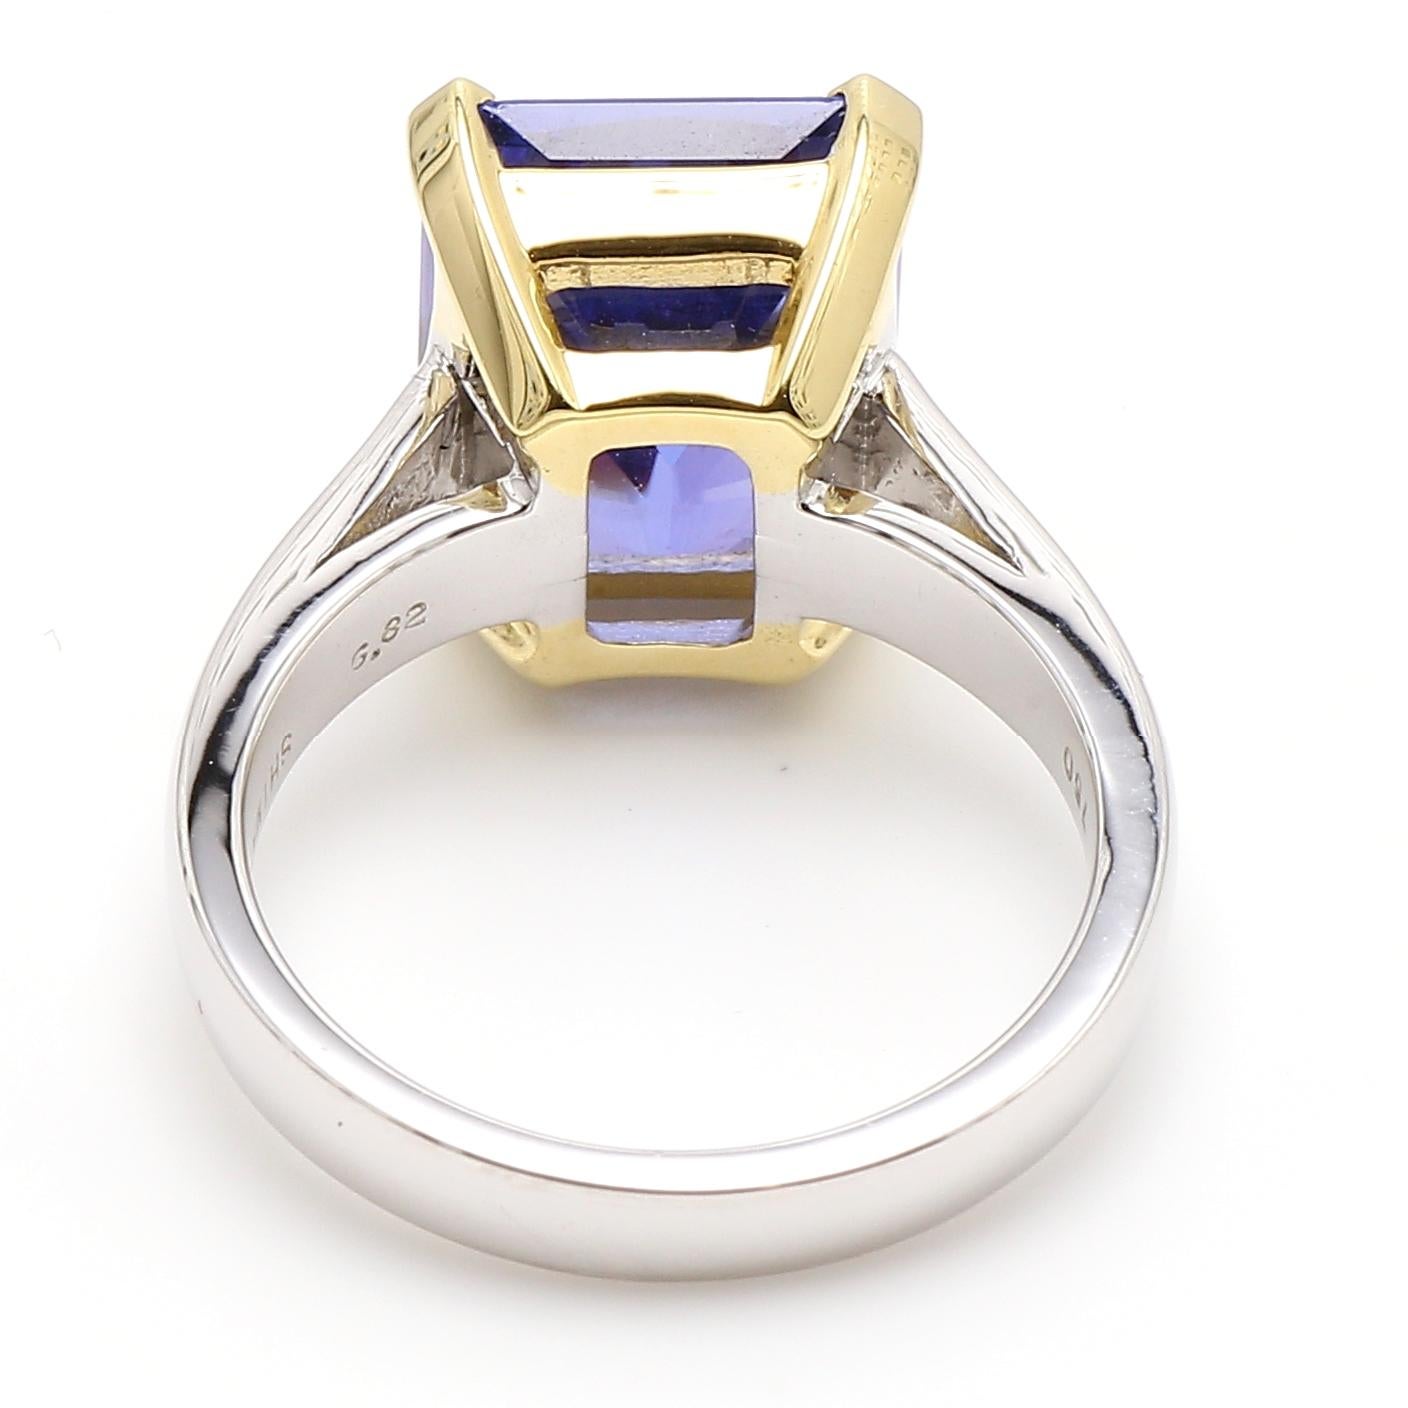 Contemporary 18 Karat White and Yellow Gold Radiant Cut Tanzanite Cocktail Ring 6.82 Carat For Sale